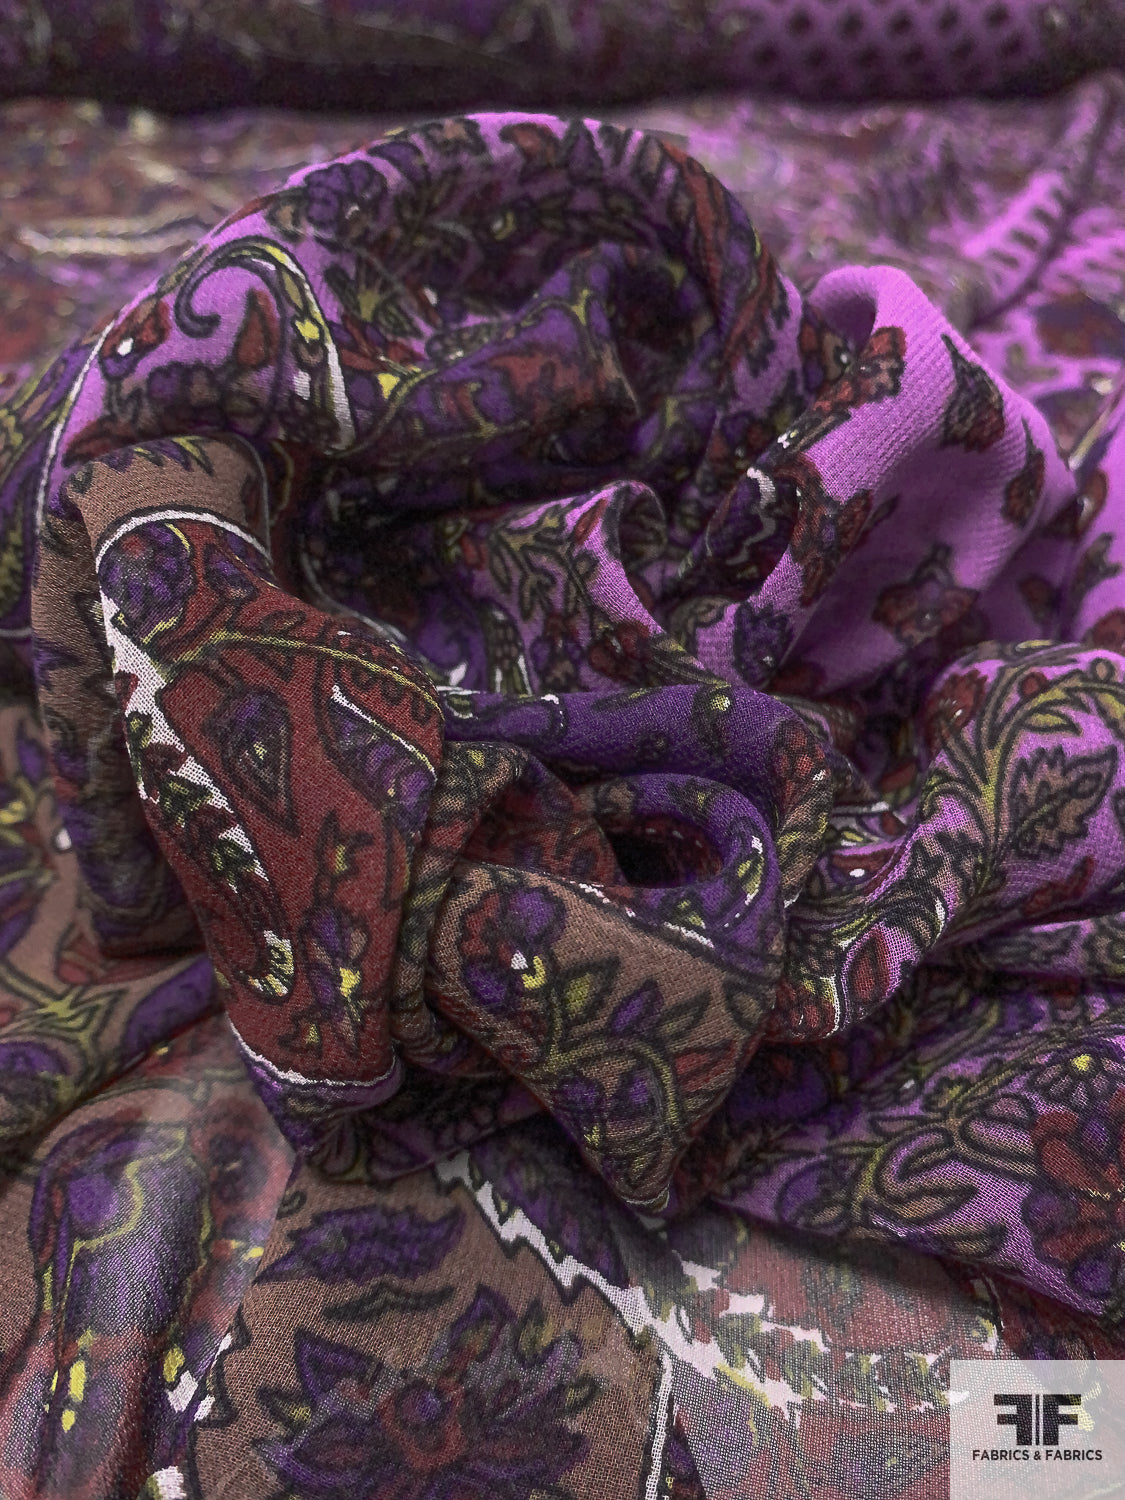 Cross and Paisley Printed Silk Chiffon - Purples / Orchid / Browns / Greens